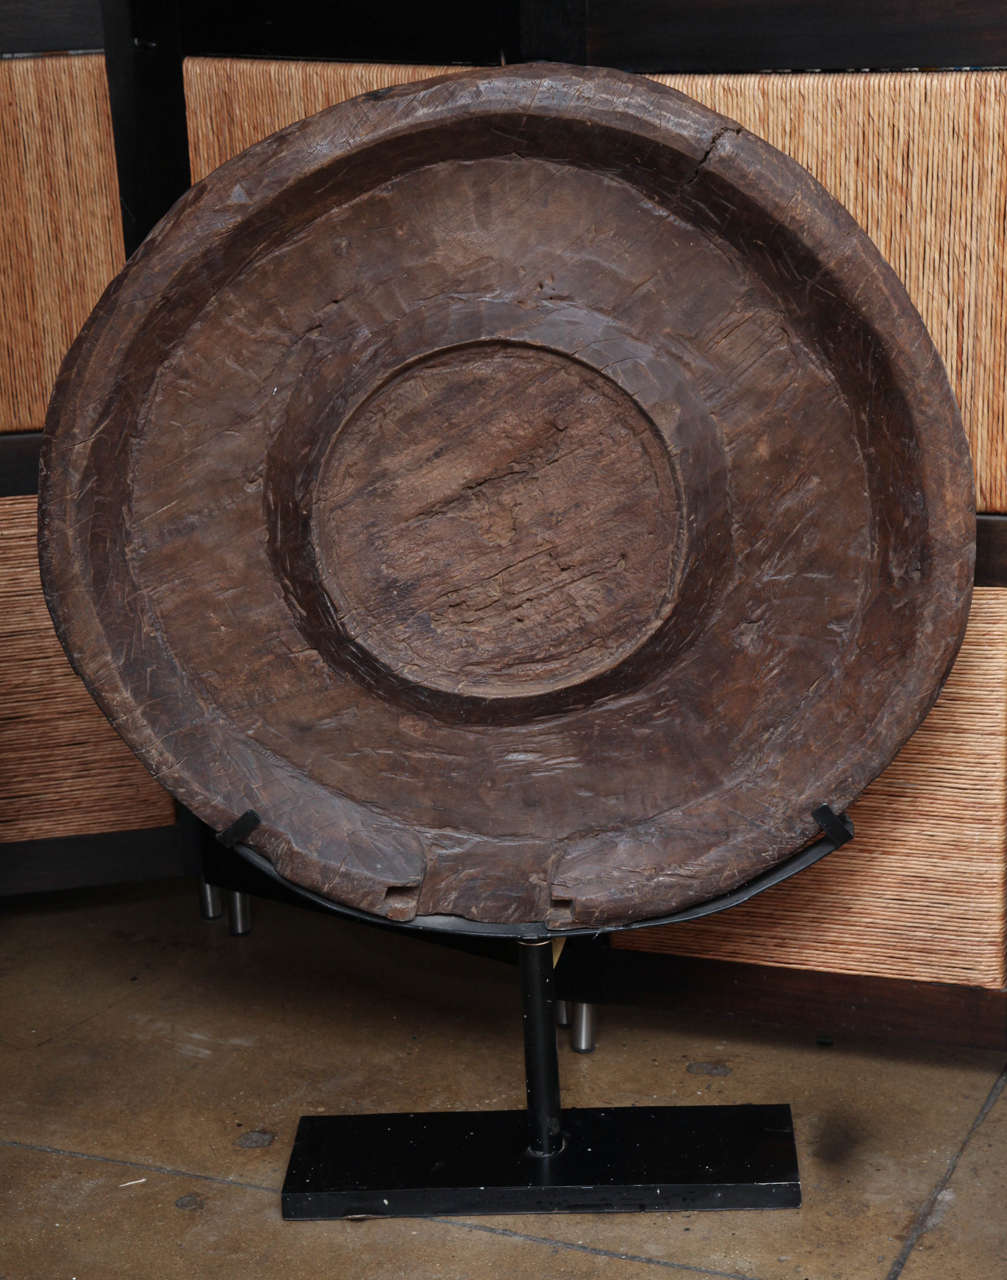 A Madura food tray sculpture from Indonesia, on a stand.